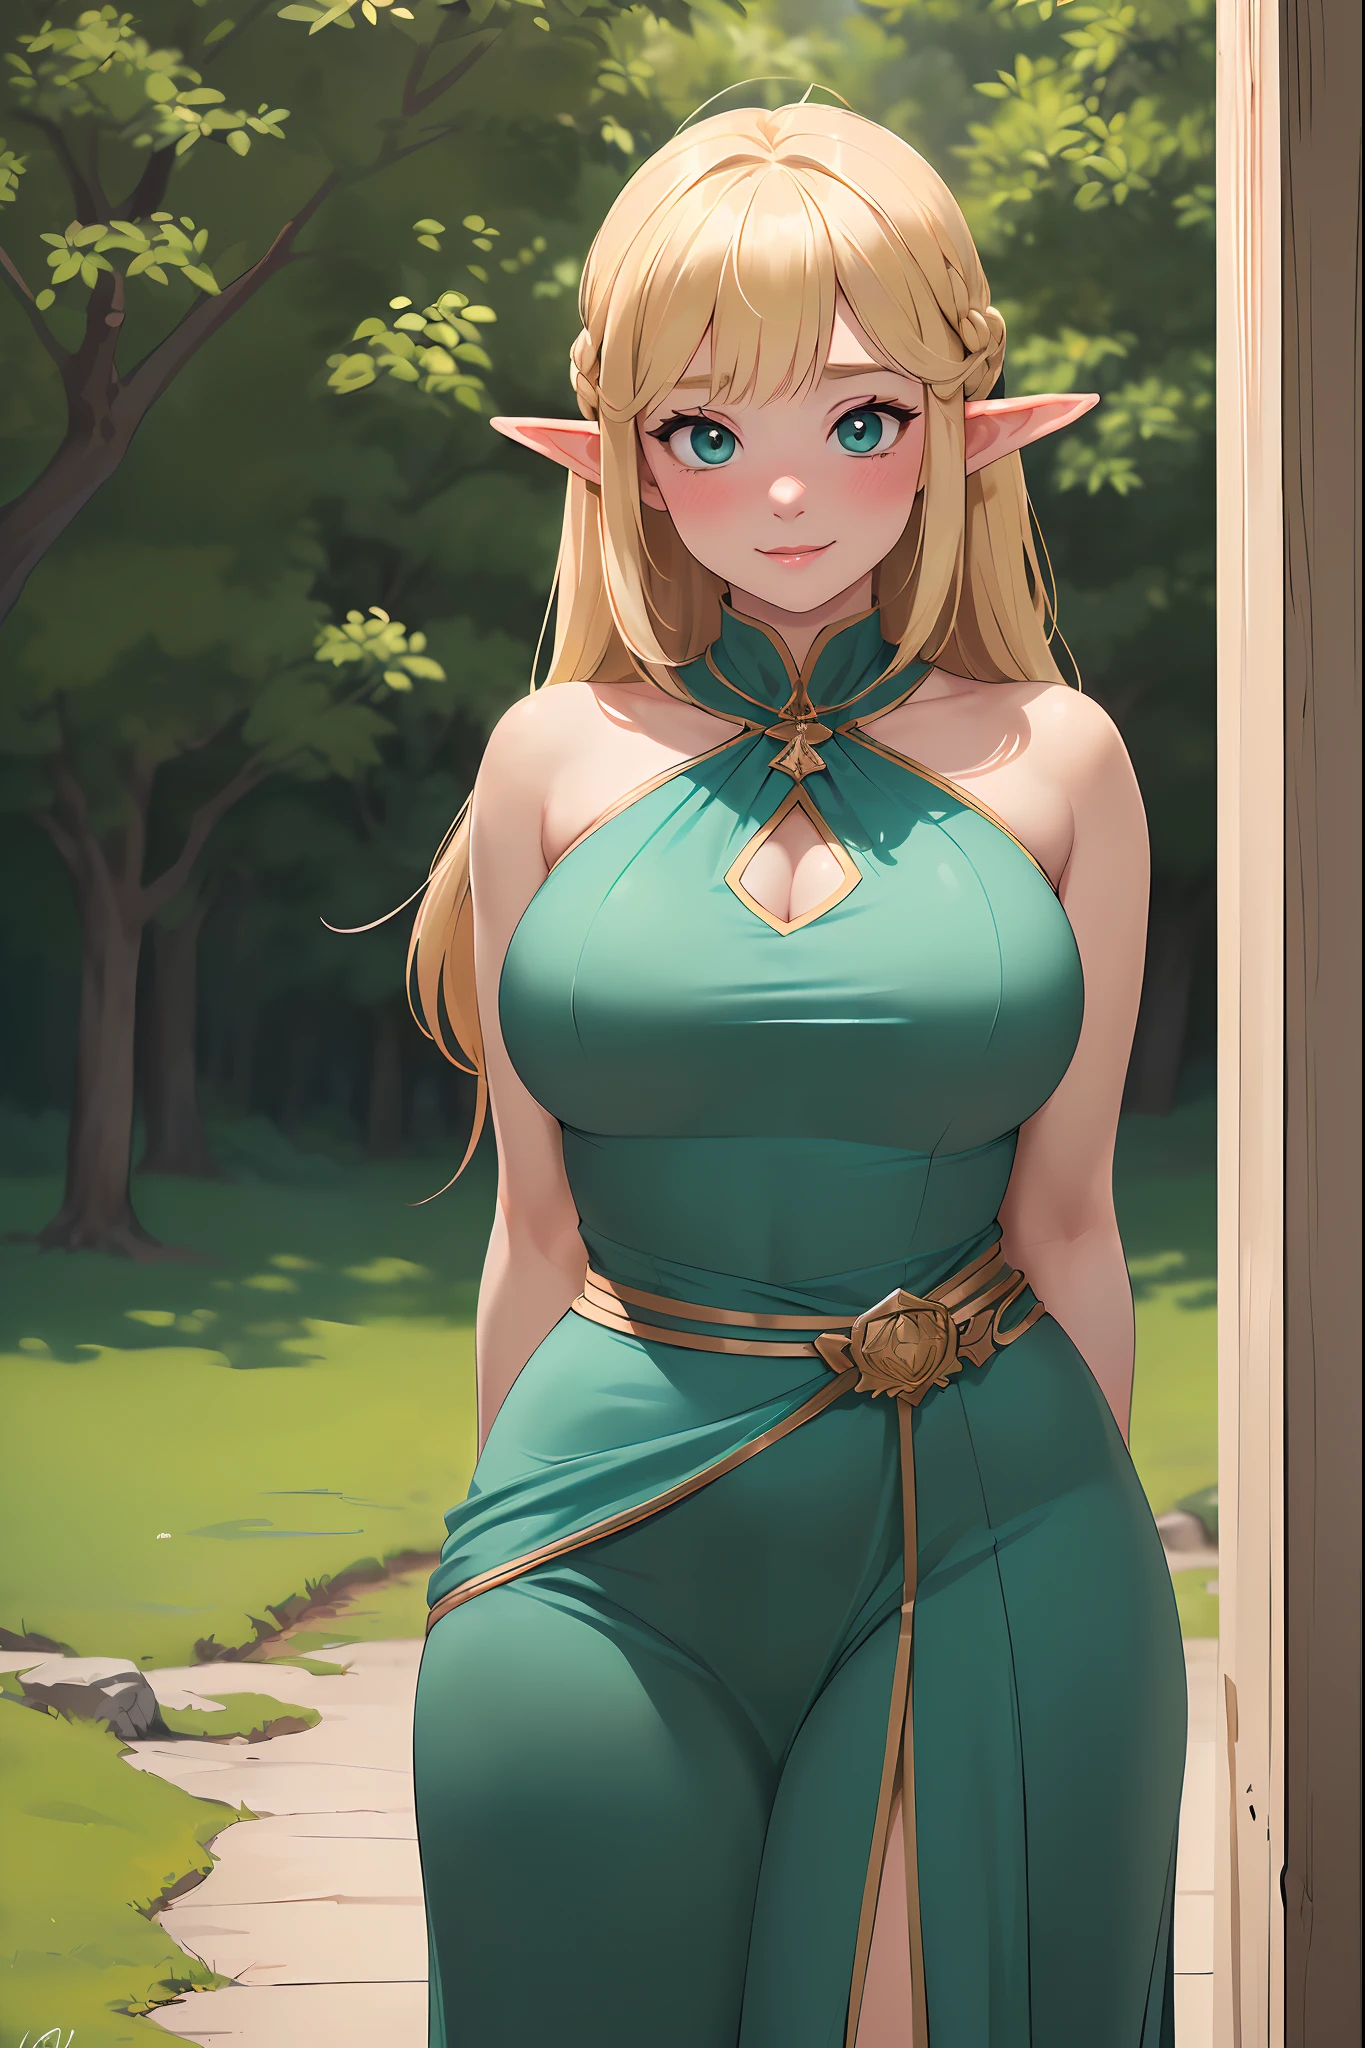 (Best quality,Unbeatable masterpiece:1.4),Ultra-detailed CG 4K,(Ultra-Detailed Clear Absurdly-Vivid Mint Big Eyes:1.2),Gorgeous Round Detailed Face(voluptuous:1.4)elf(Voluminous Long Blonde Hair: 1.4),Adult(bangs, side locks:1.2)Seductive(Intricately beautiful dresses:1.3)(Zelda)(celestine lucullus: 1.2)(Solo:1.4)(1girll: 0.5)(facingviewer:1.2)(arms back behind:1.2)(Cowboy shot:1.2)(From above:1.1),skin indentation(Curvaceous:1.4)(Curvy:1.4)(Bimbo: 1.4)(normal waist: 1.2)(Thick lips: 1.3)small-nose(Light smile: 1.2)Rocks,Green trees, A plant,Bush, (Shy blush:1.4) Dynamic pose